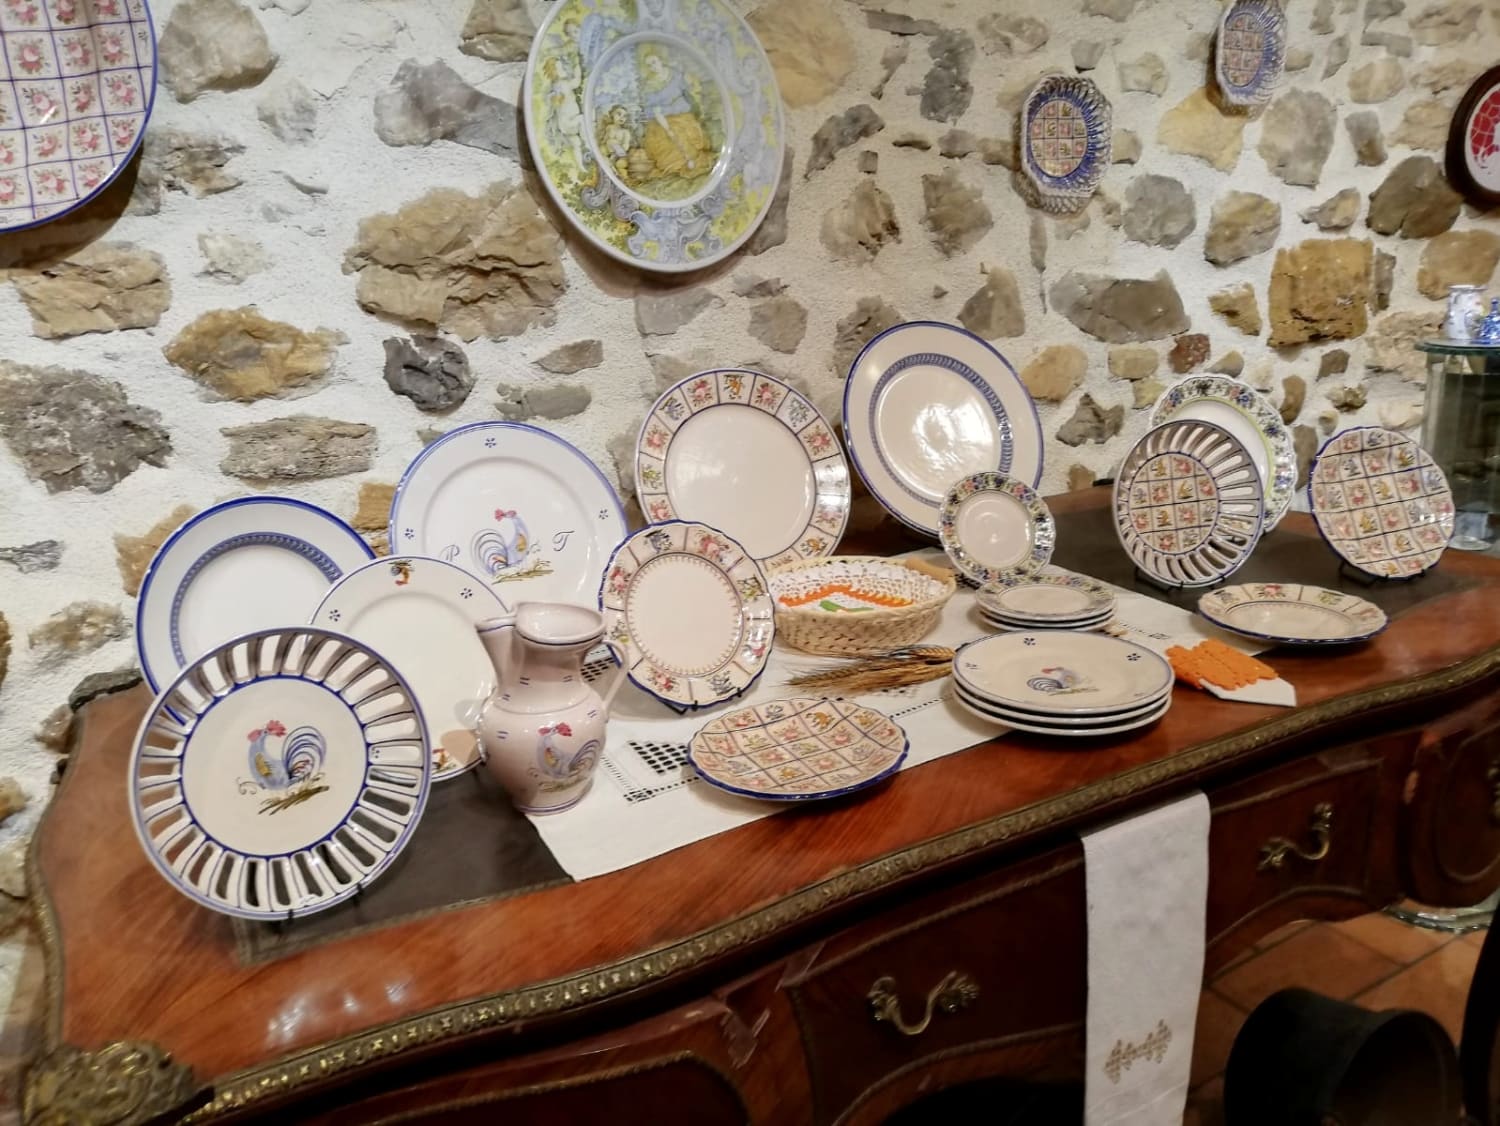 Castelli: A gem of craftsmanship in the heart of Abruzzo. - South European Wanderings